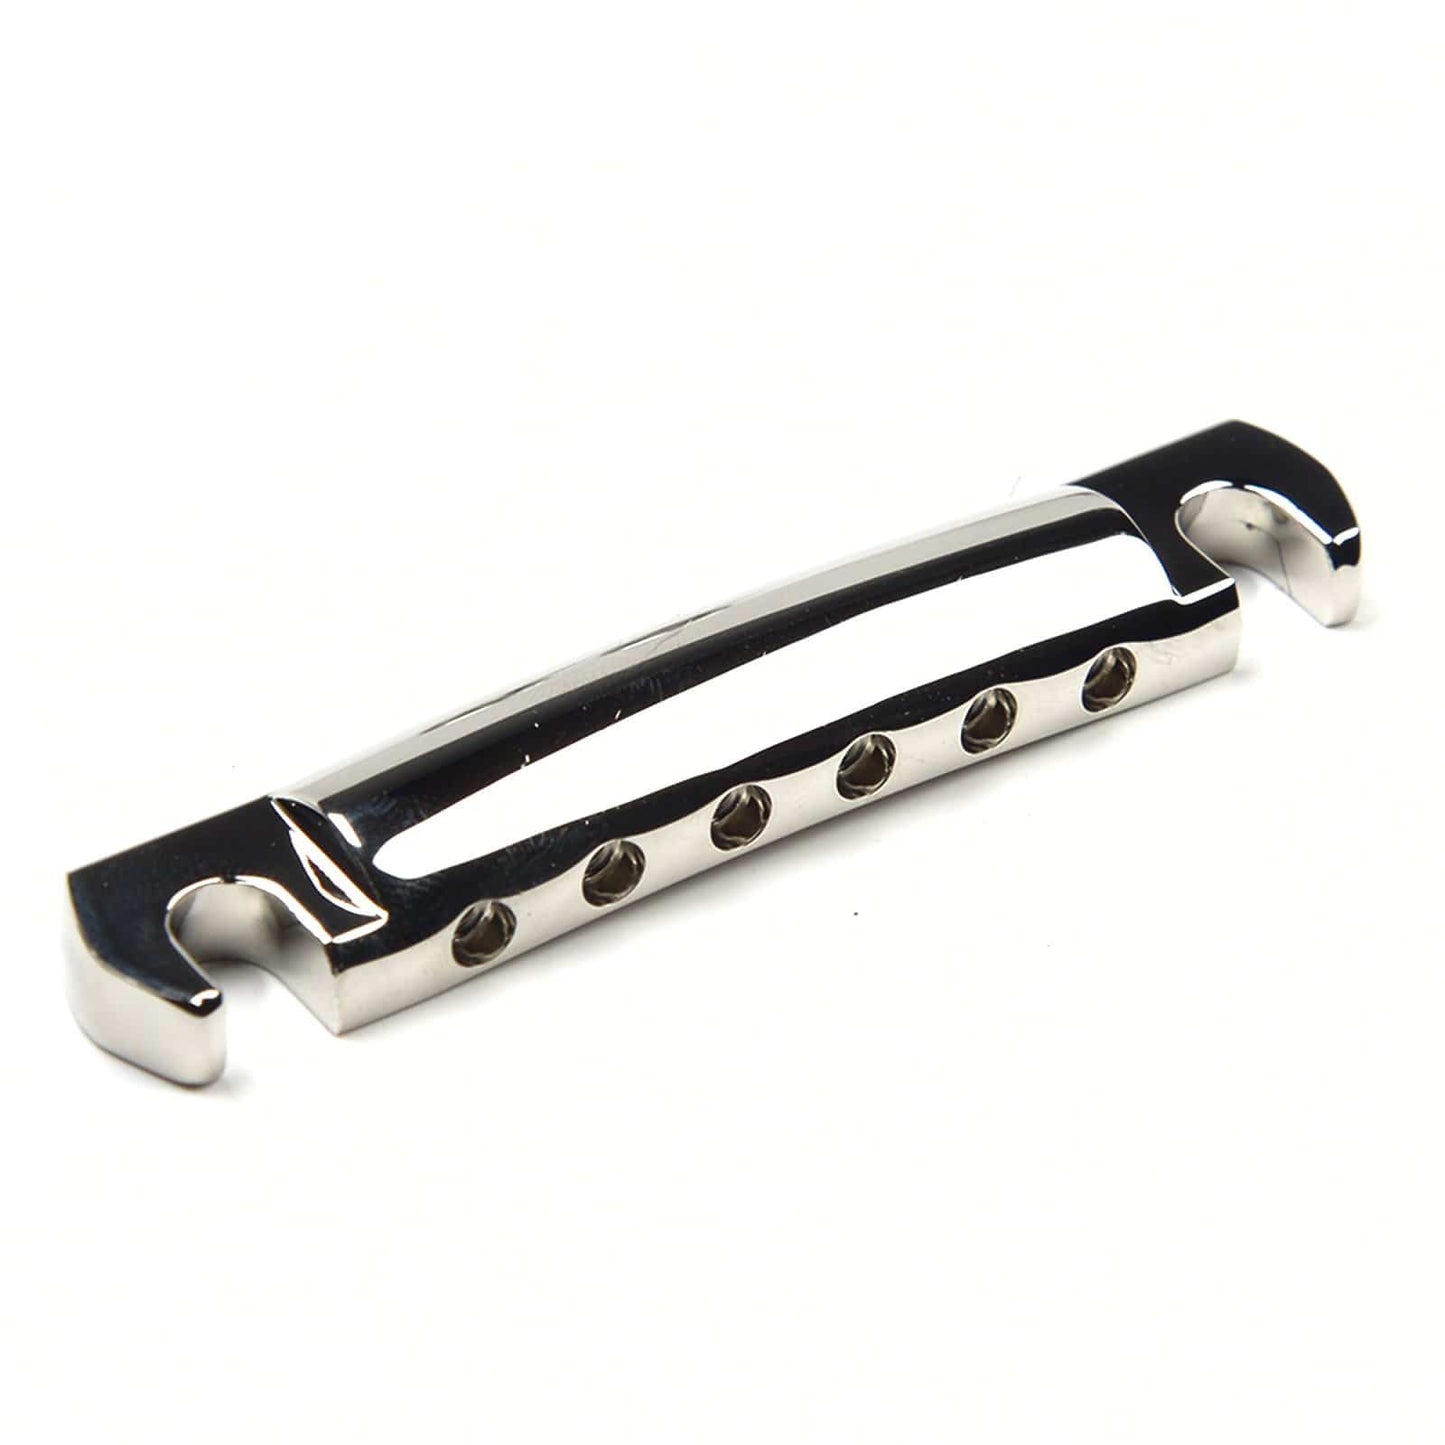 Gibson Historic Lightweight Tailpiece - Nickel Parts / Guitar Parts / Tailpieces